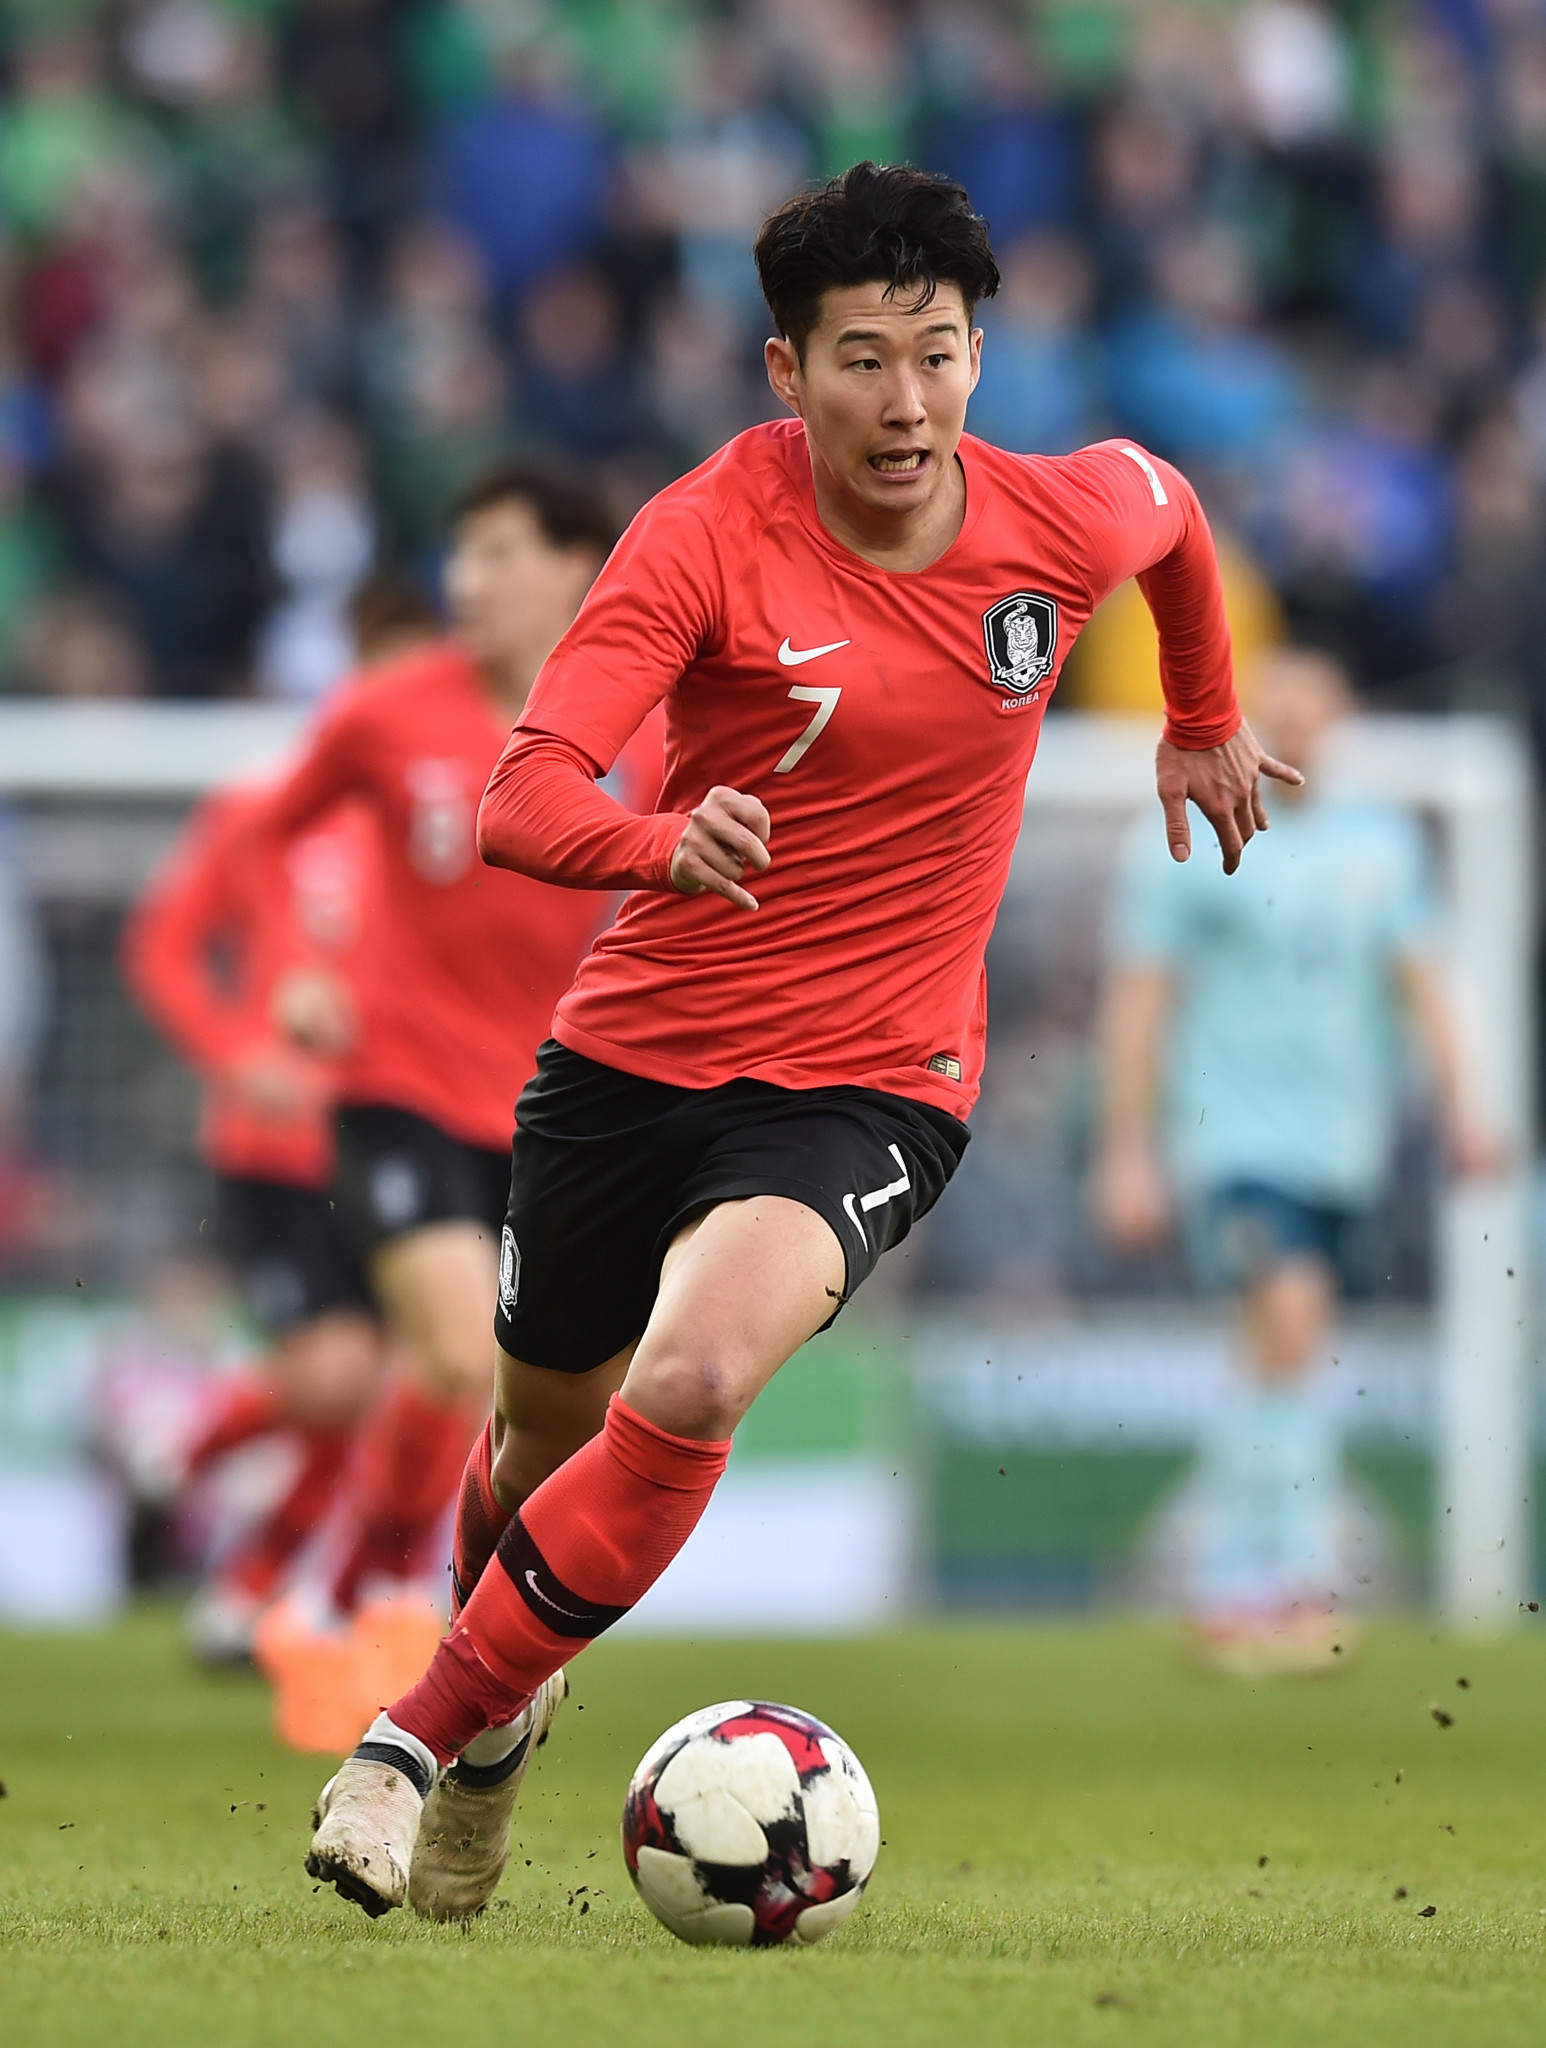 Son Heung-min is already due to play for South Korea at the FIFA World Cup in Russia and now wants Tottentham Hotspur to release him to play in the Asian Games in Jakarata Palembang ©Getty Images